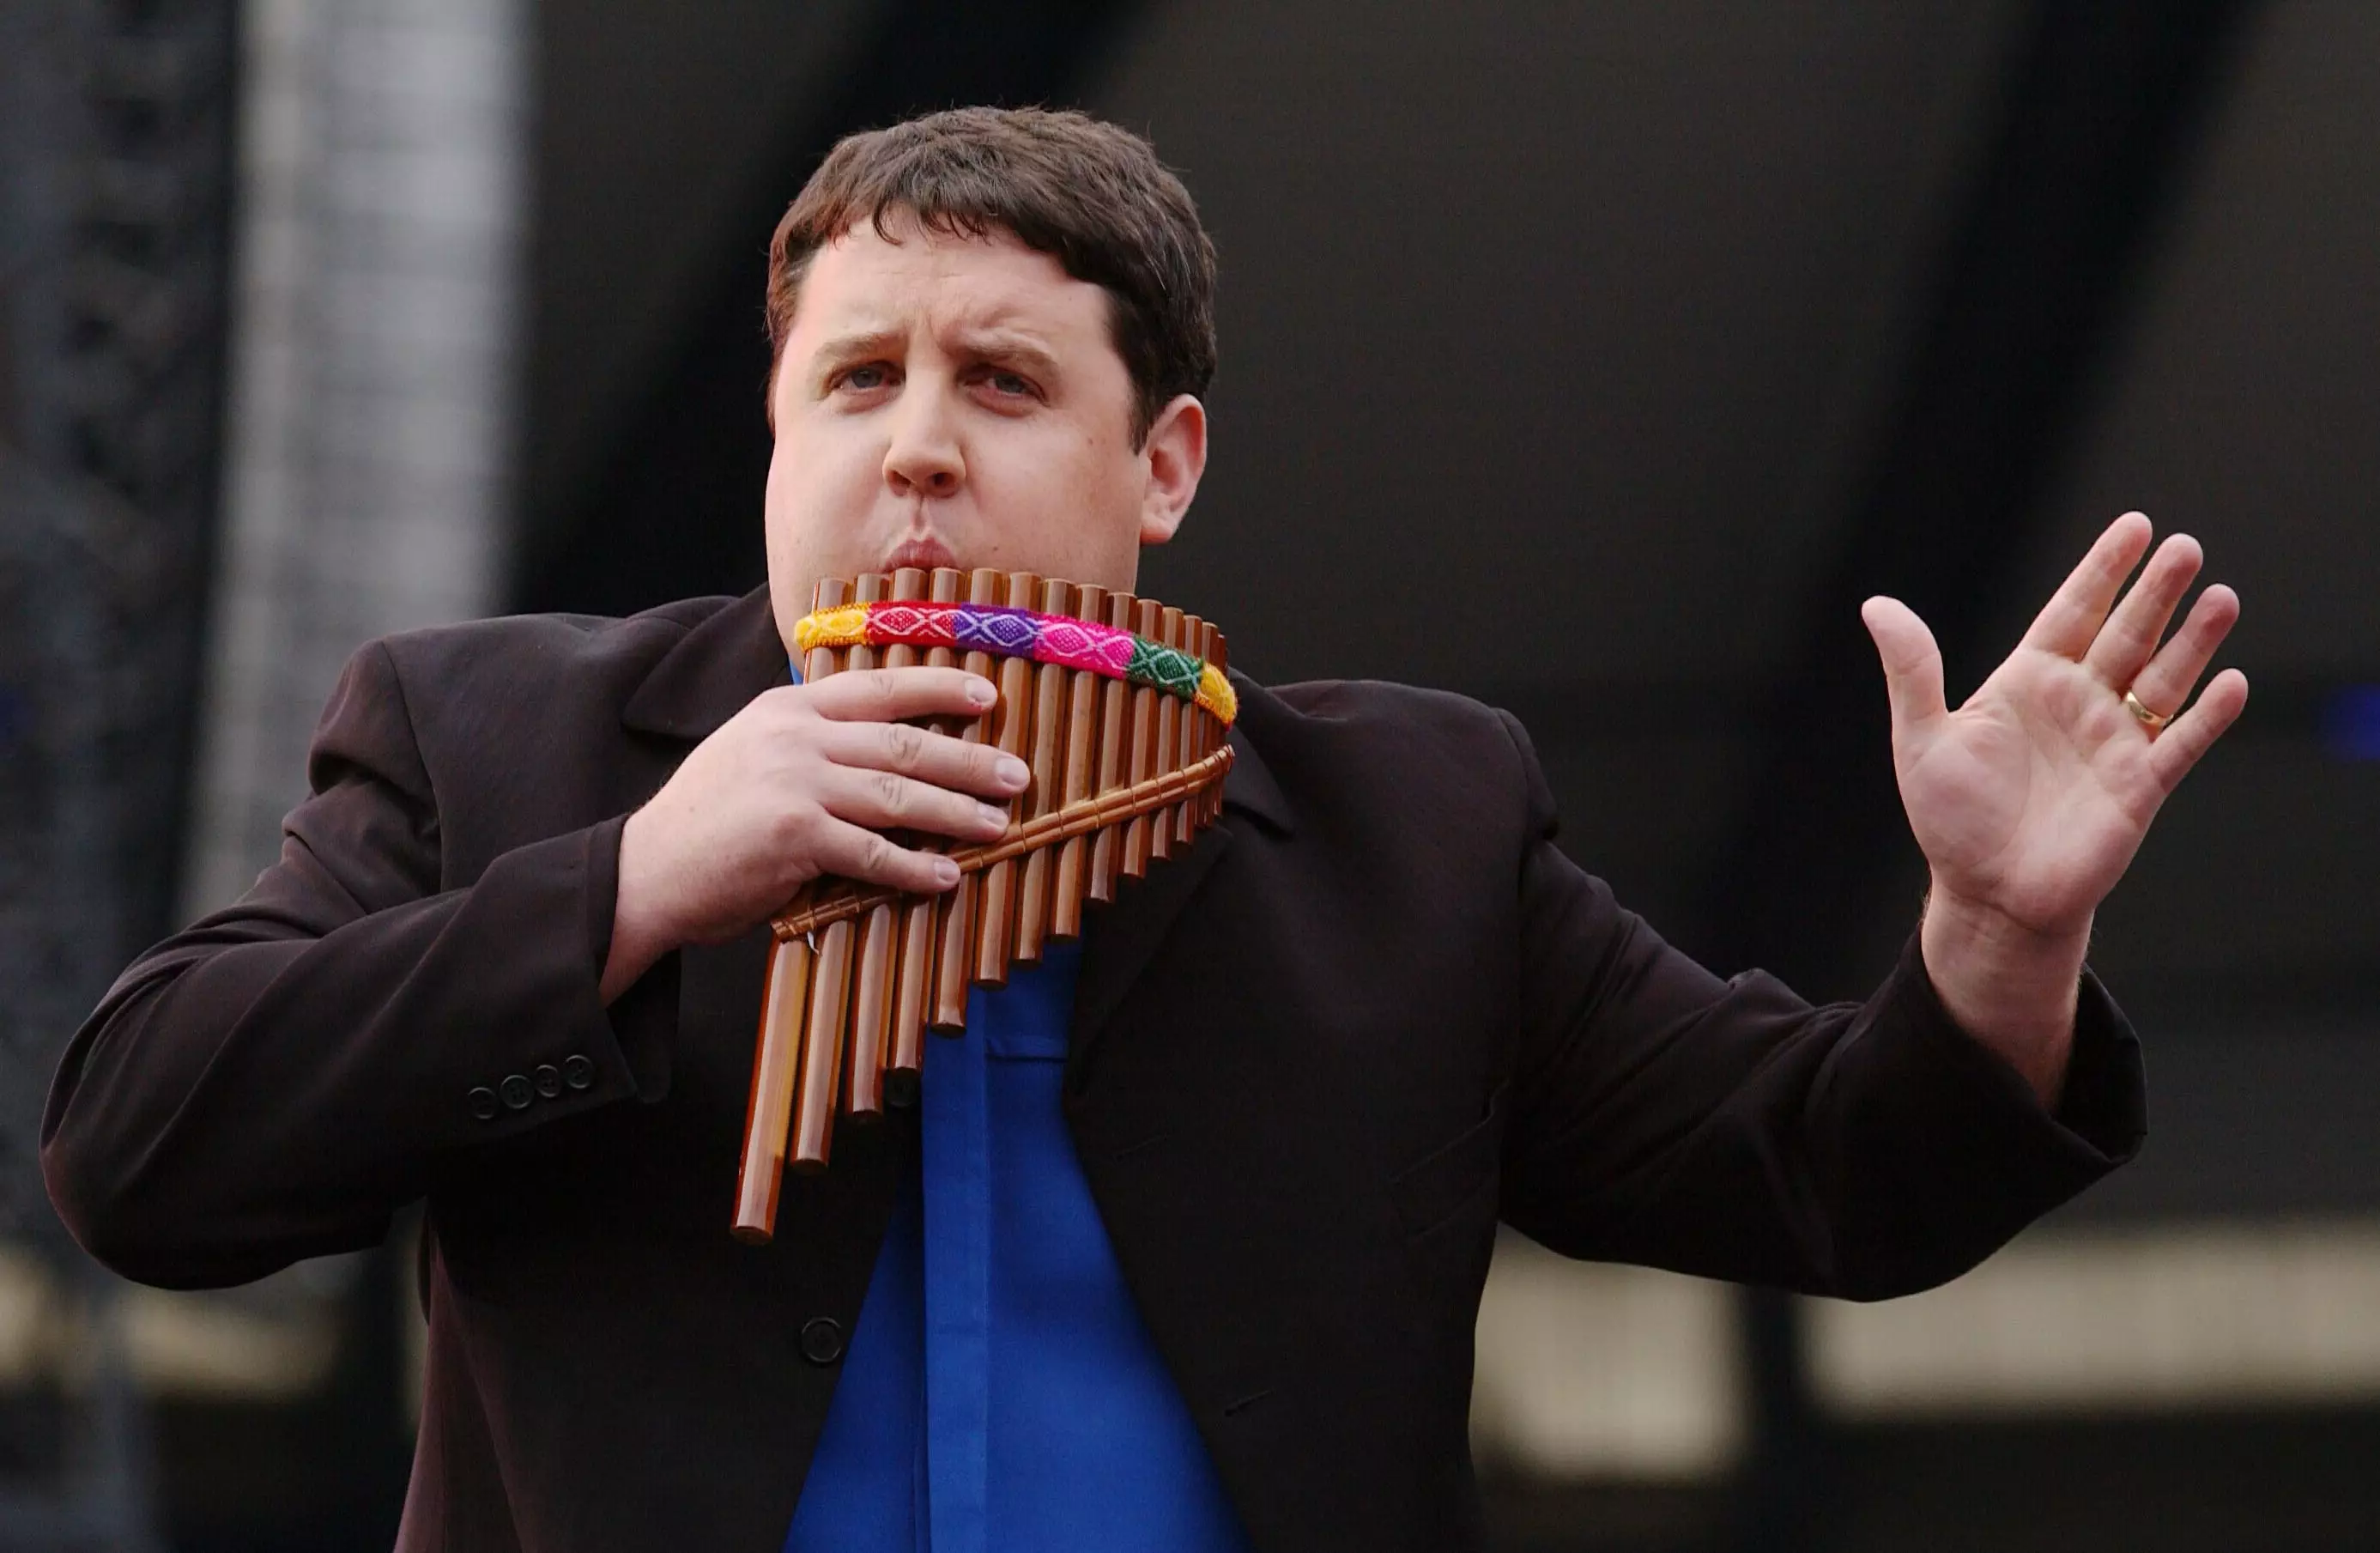 Wonder if Peter will get his panpipes out?